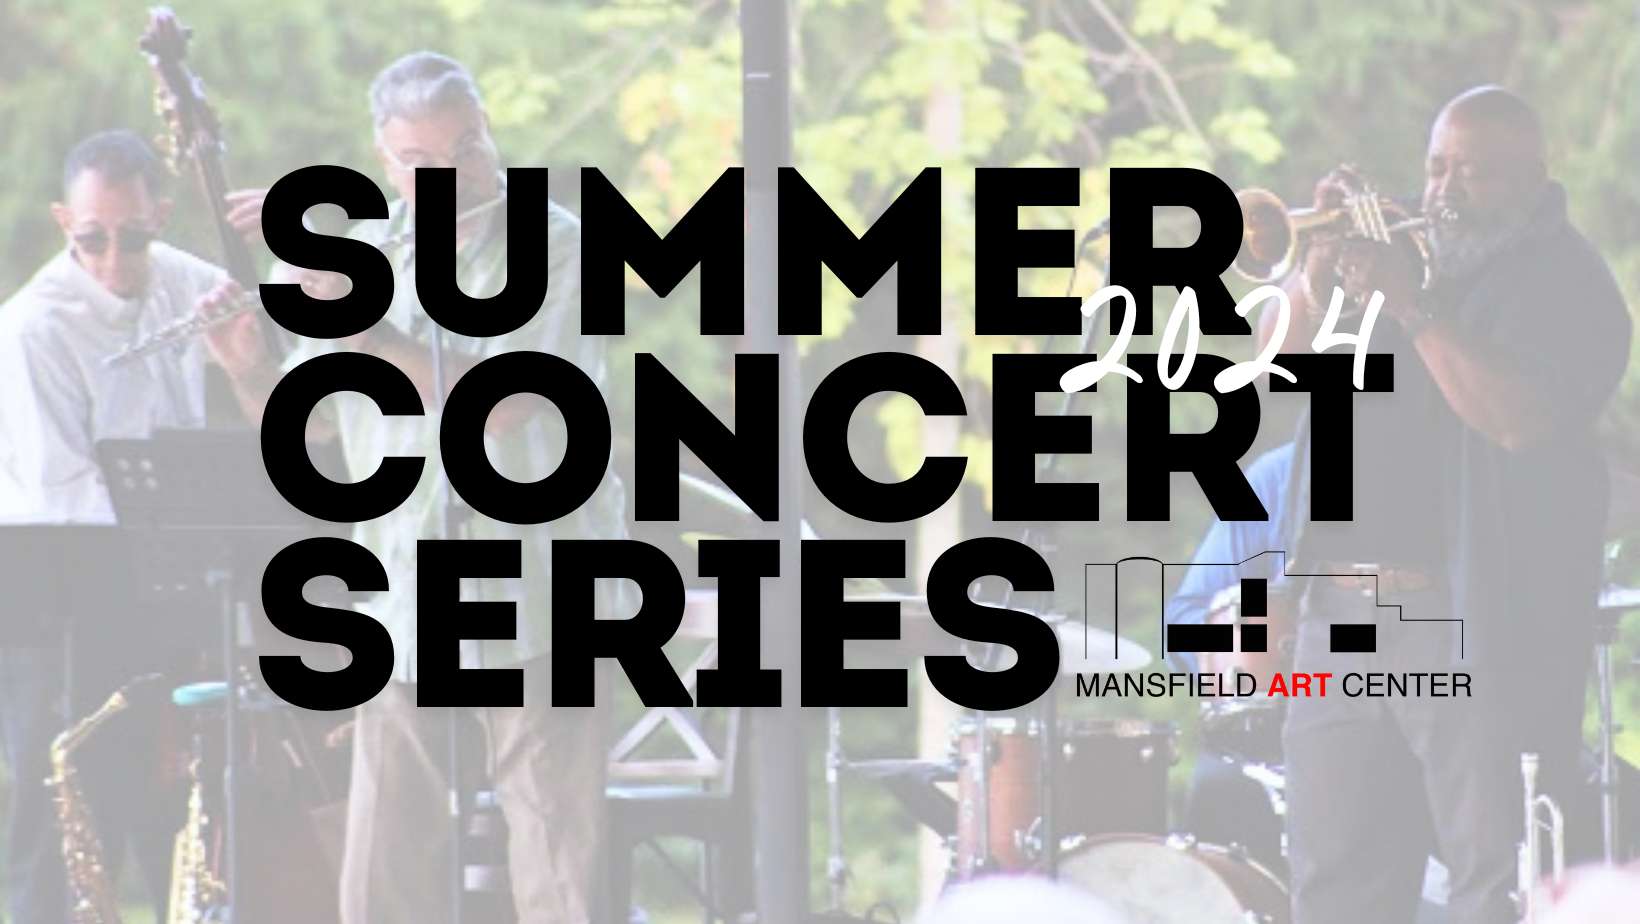 Photo for event Summer Concert Series